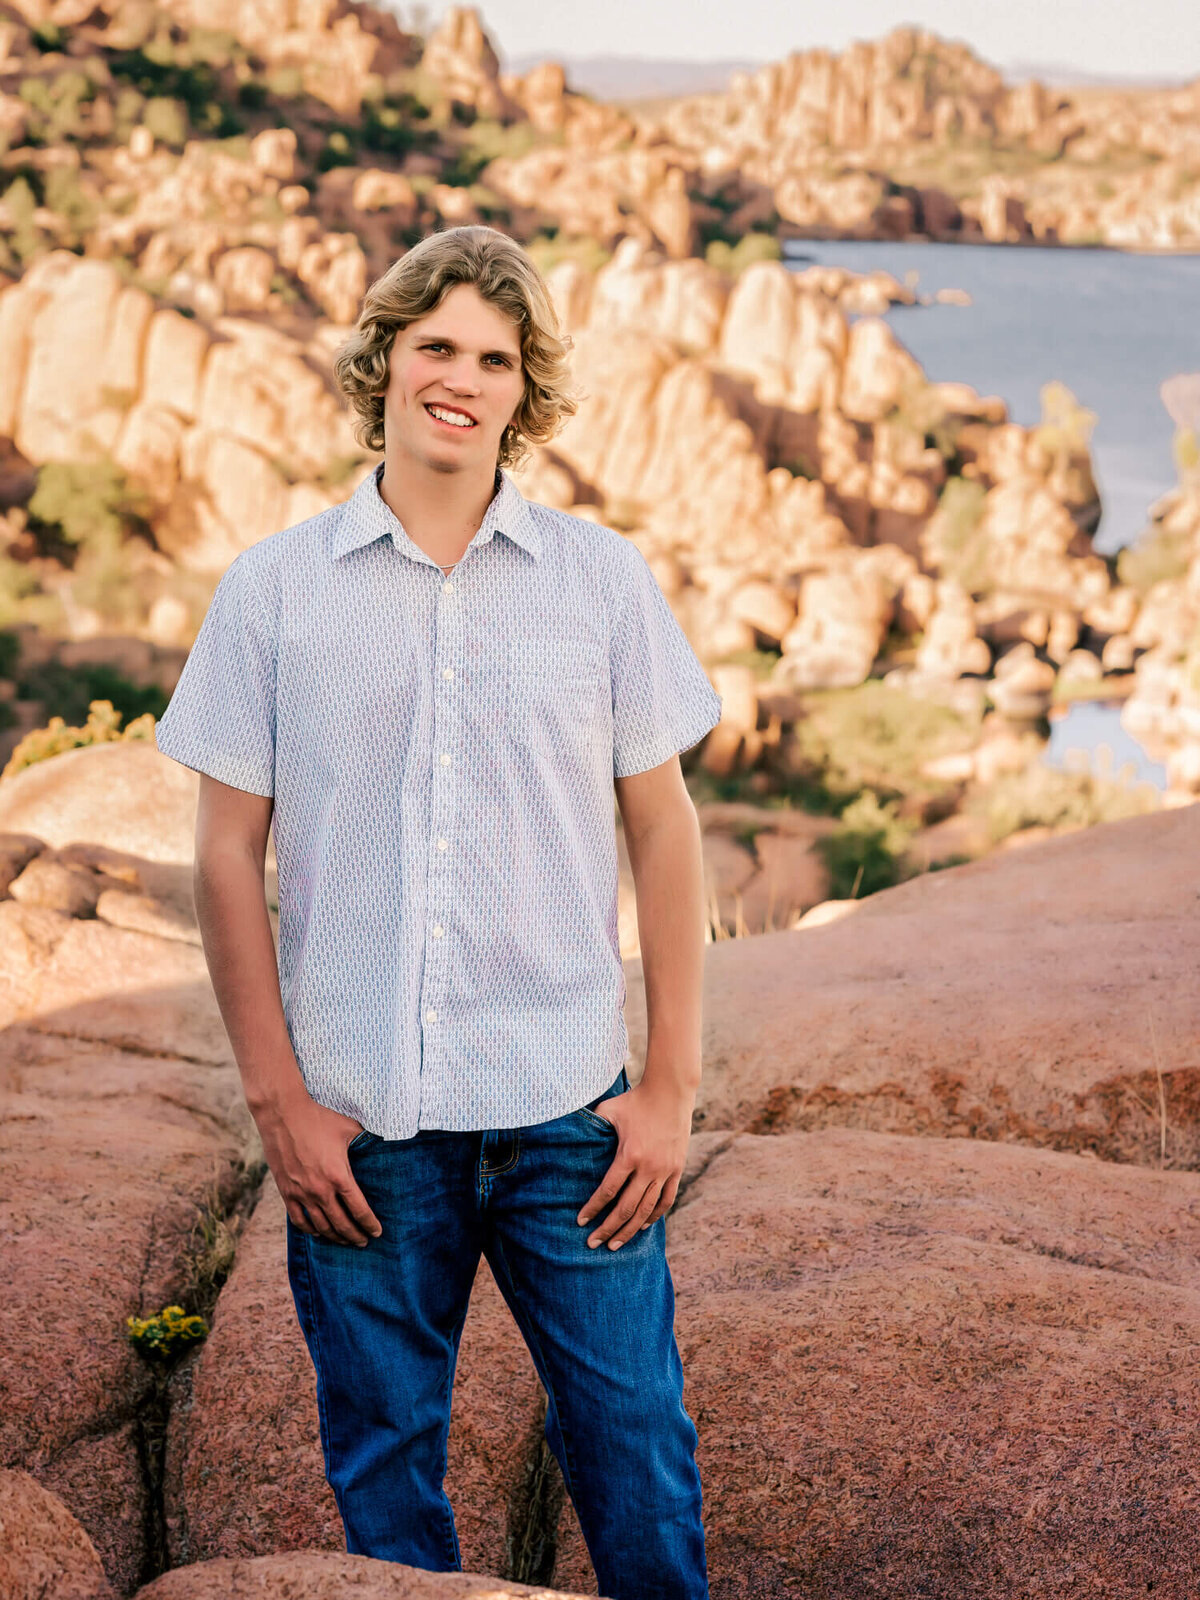 Watson Lake is a great location for Prescott senior photos with Melissa Byrne